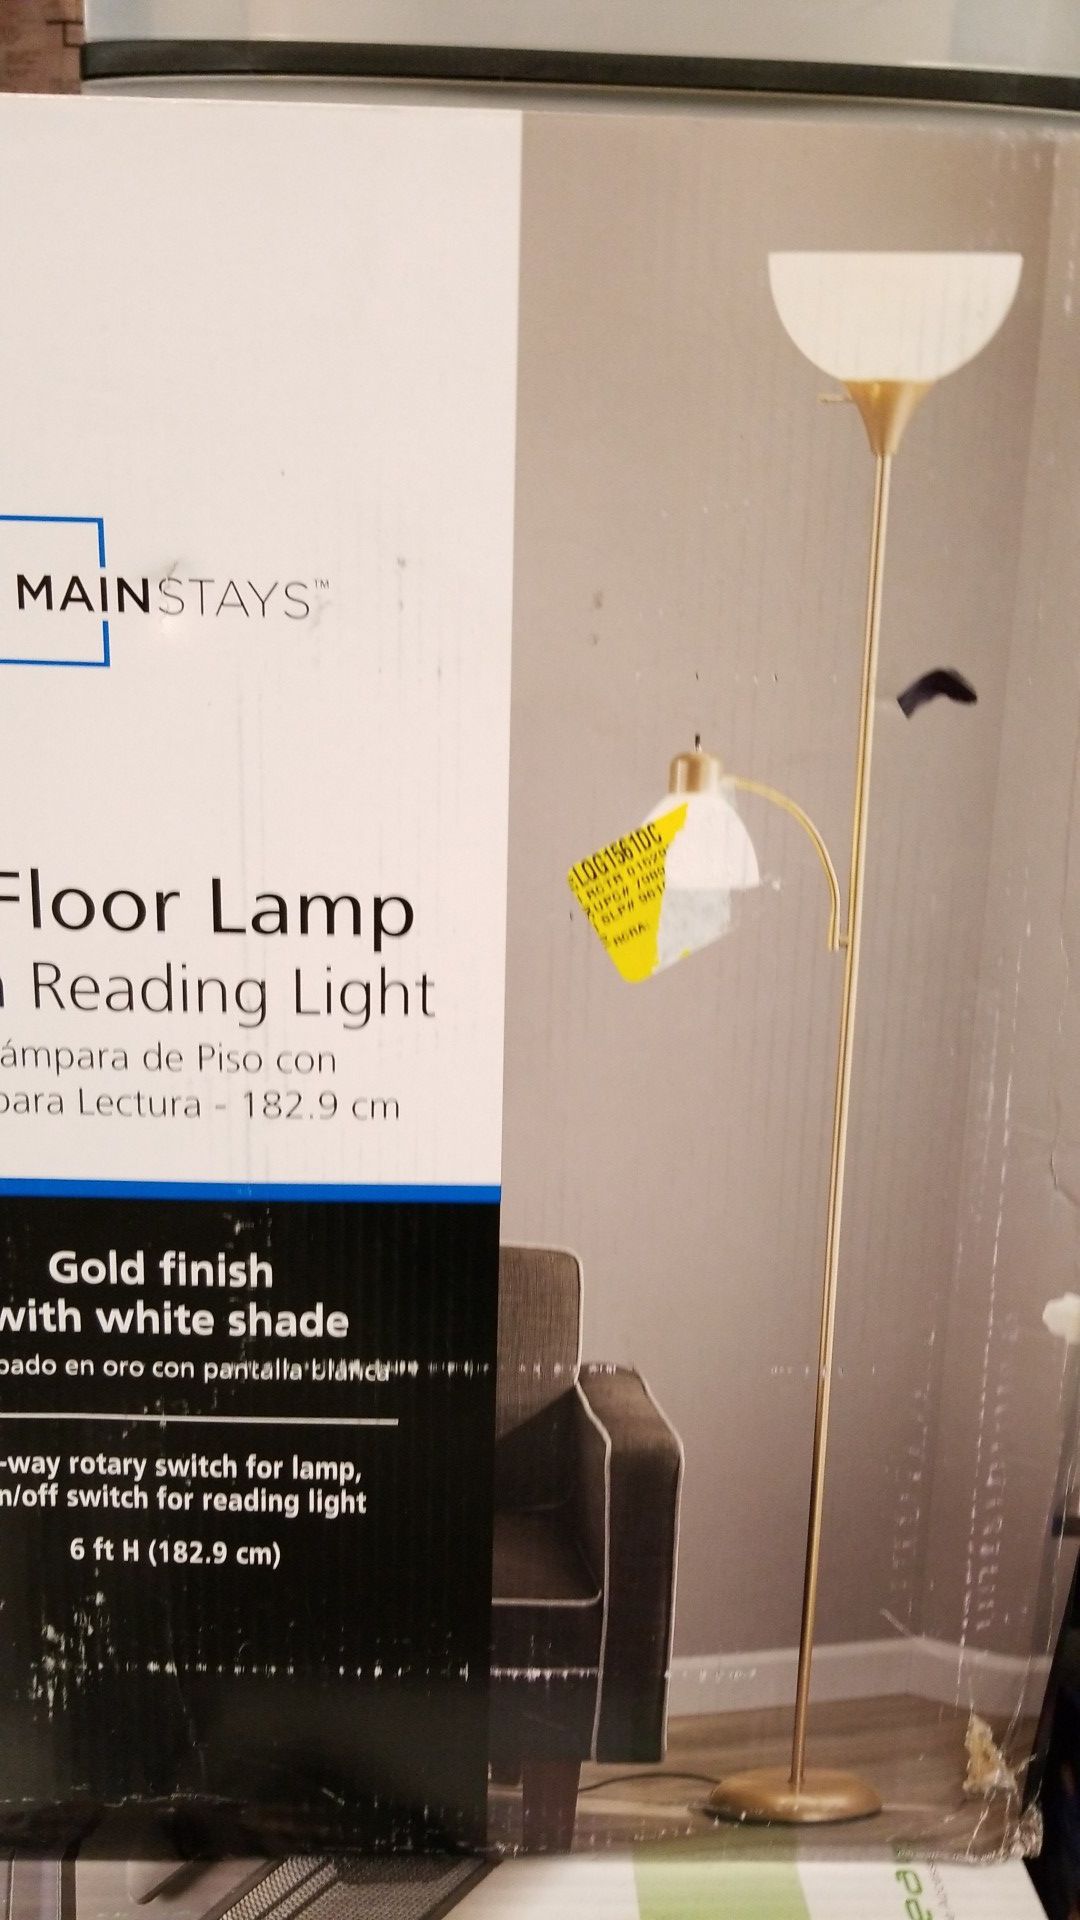 6' Floor Lamp with reading lite. Gold